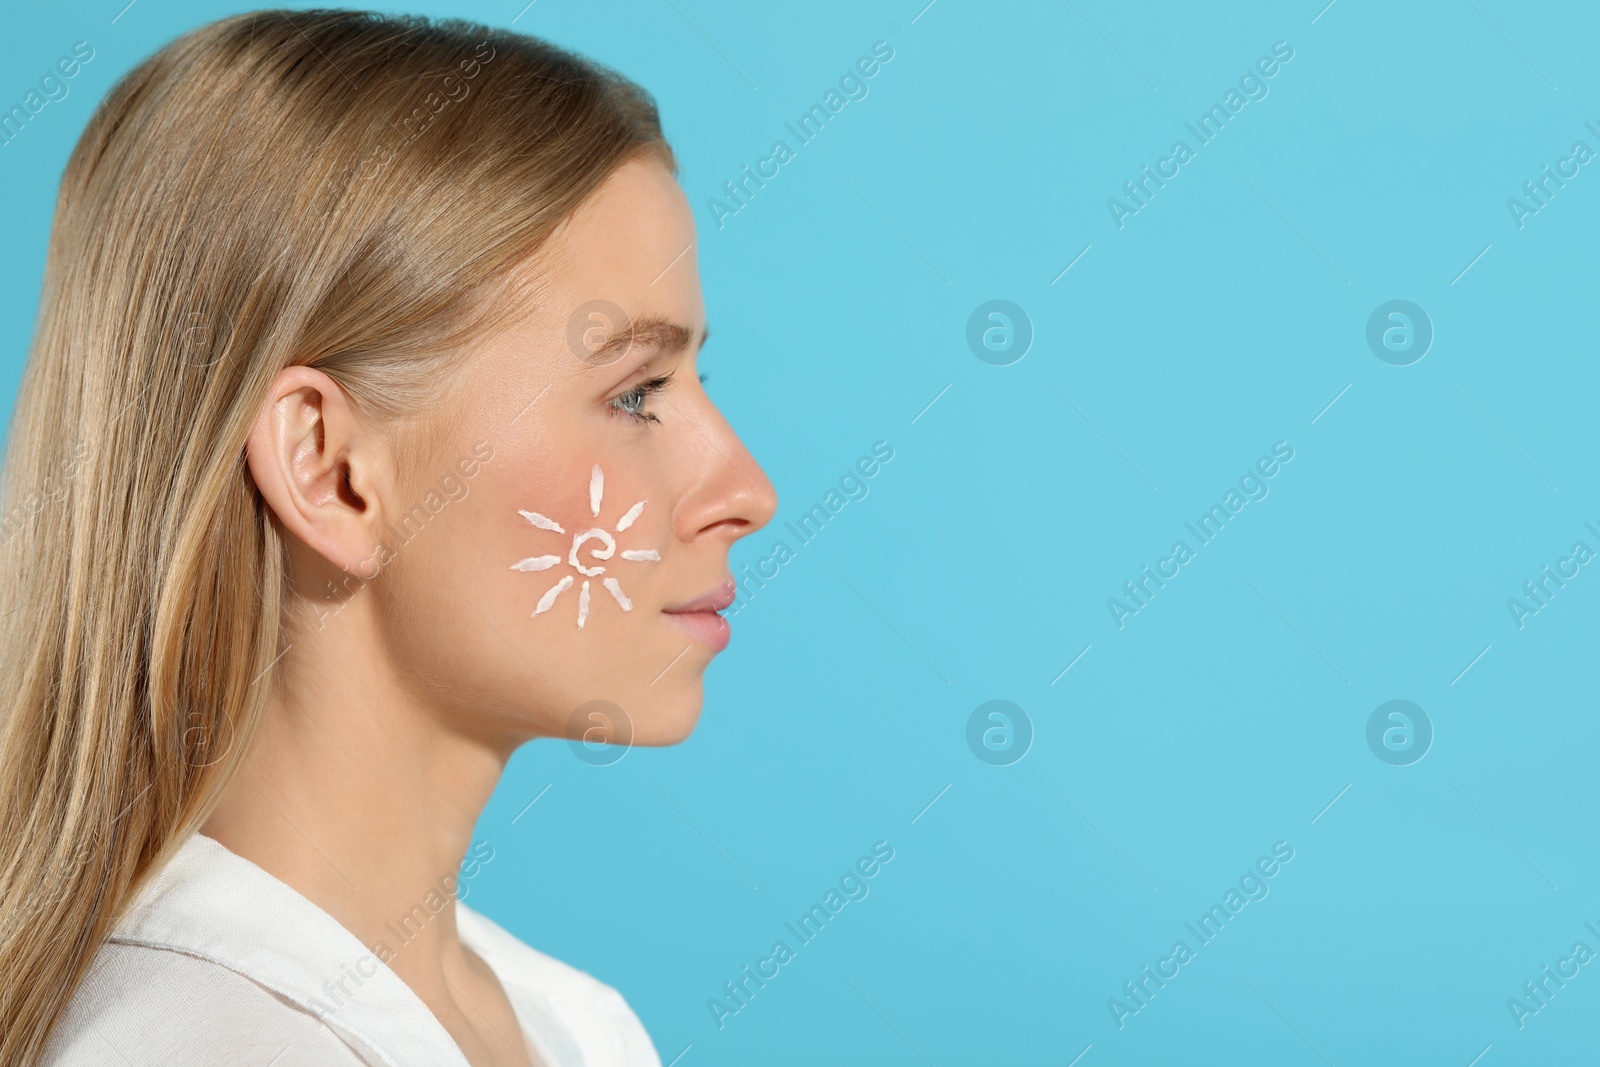 Photo of Beautiful young woman with sun protection cream on her face against light blue background, space for text